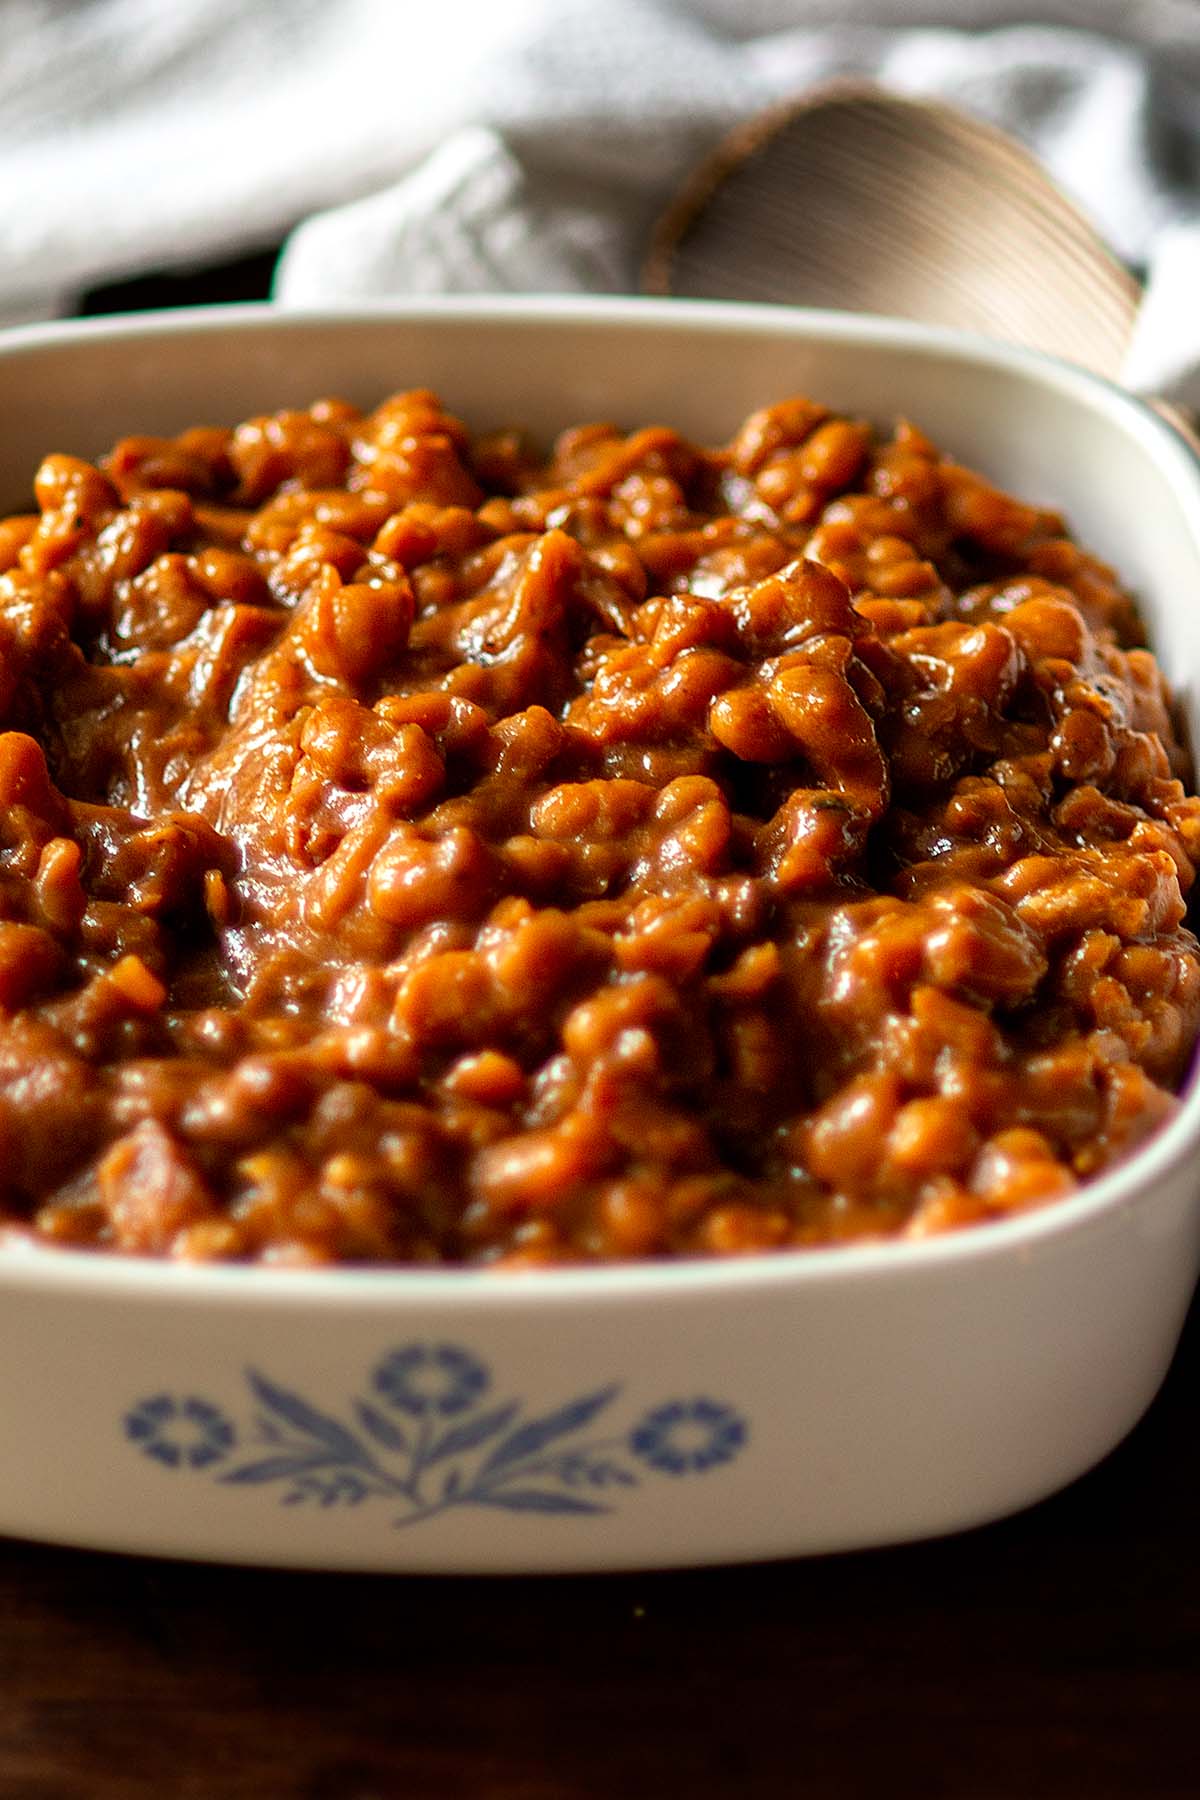 Baked beans in a white serving dish.